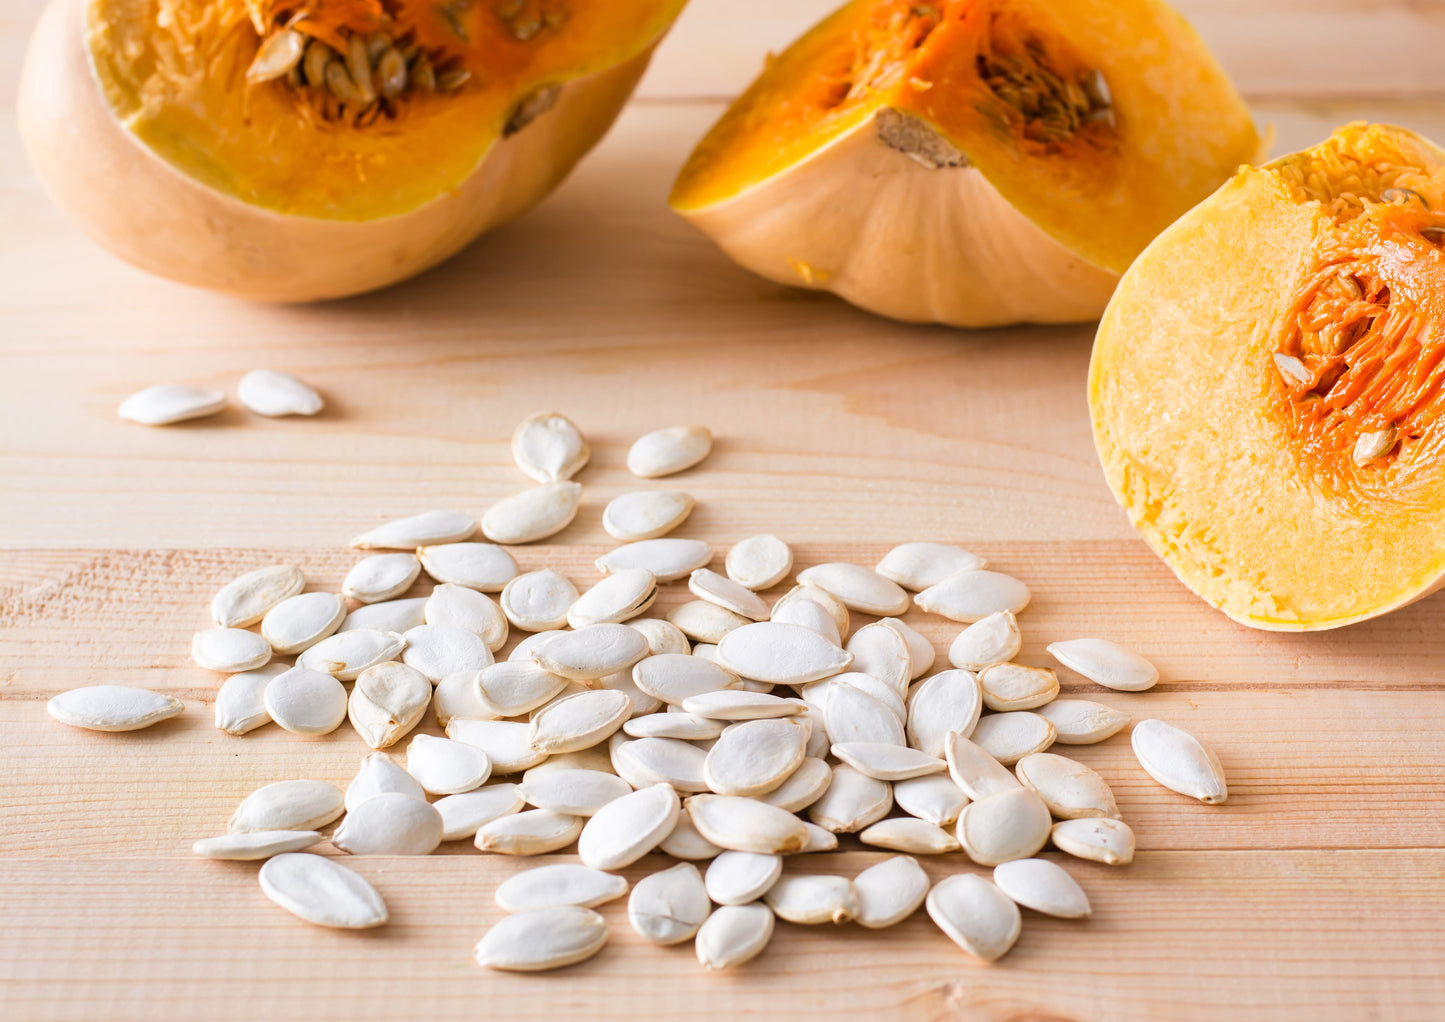 Organic Raw Pumpkin Seeds in Shell – Non-GMO, Dried, Unsalted, Unroasted, Vegan, Bulk. Good Source of Protein, Fiber, Omega Fats. Great for Roasting with Homemade Seasonings